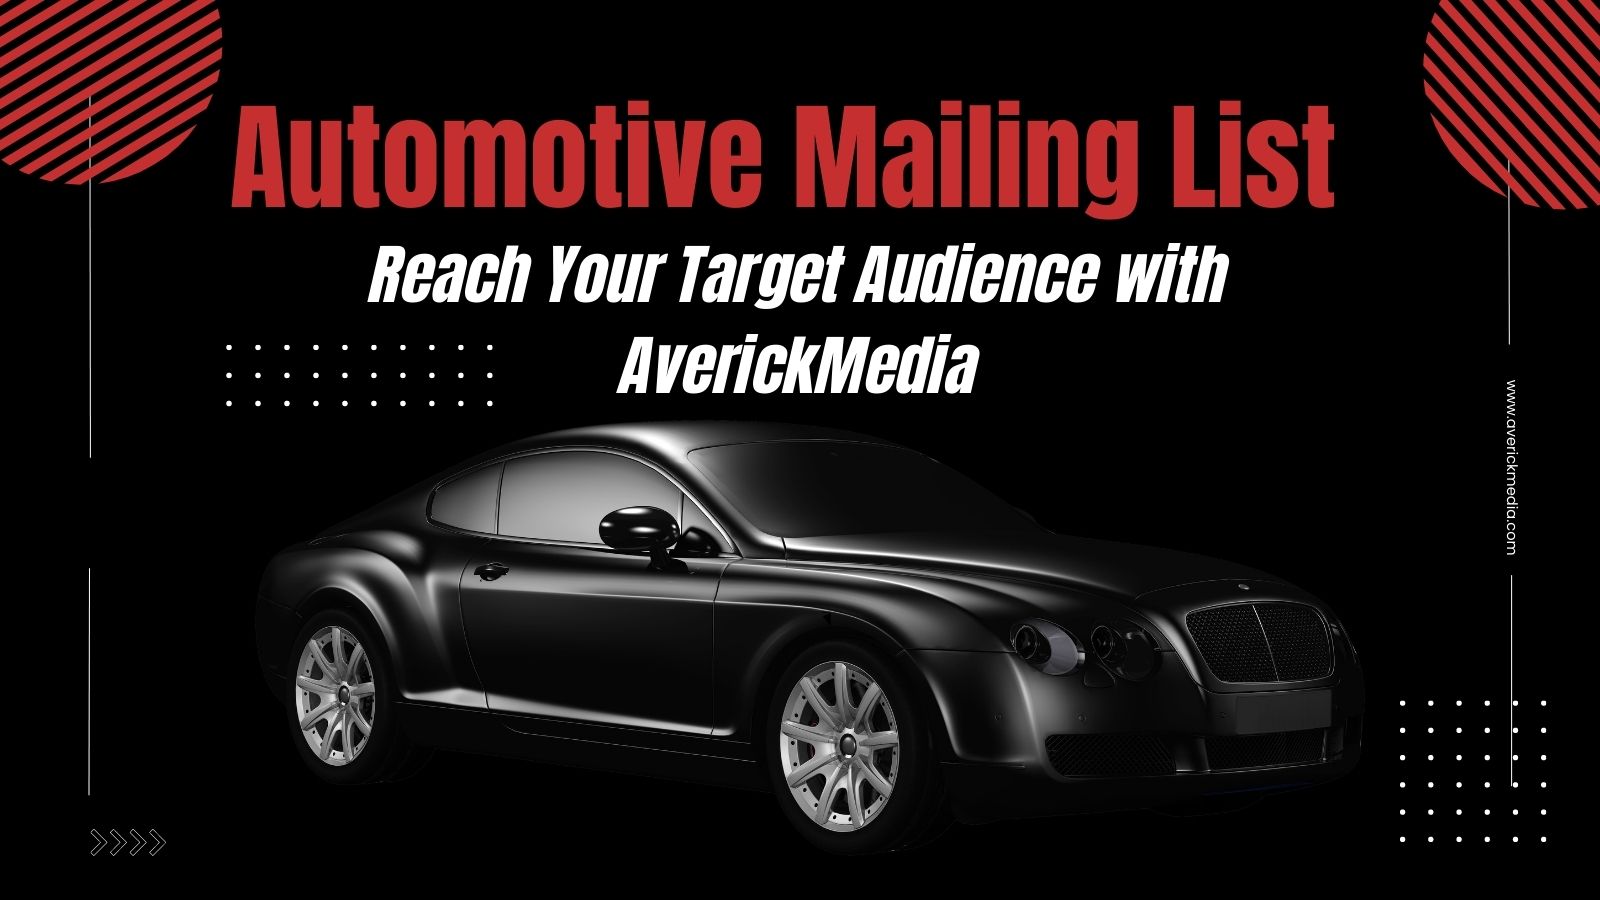  Automotive Mailing List | Reach Your Target Audience with AverickMedia